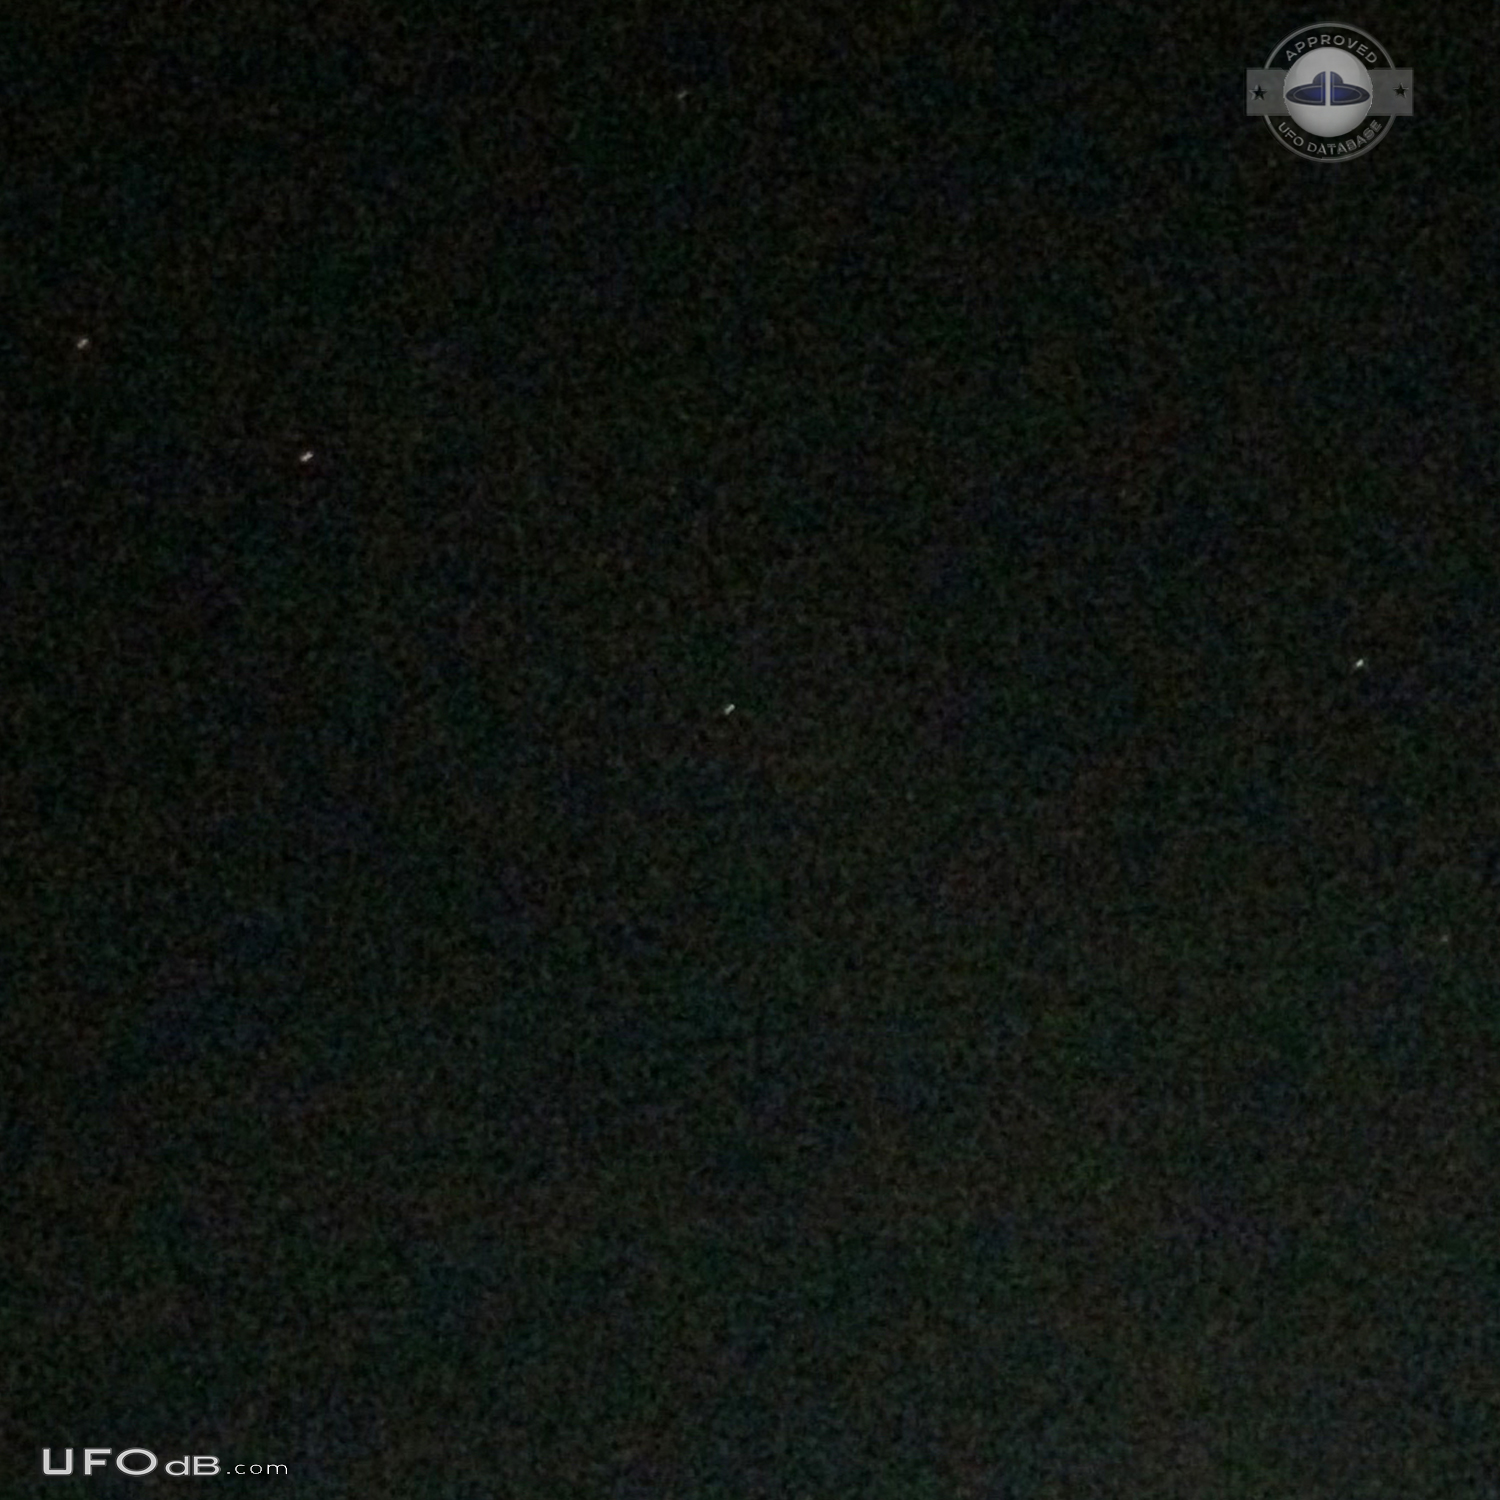 7 red star like UFO ascended above cloud - Cambodia 2015 UFO Picture #676-4